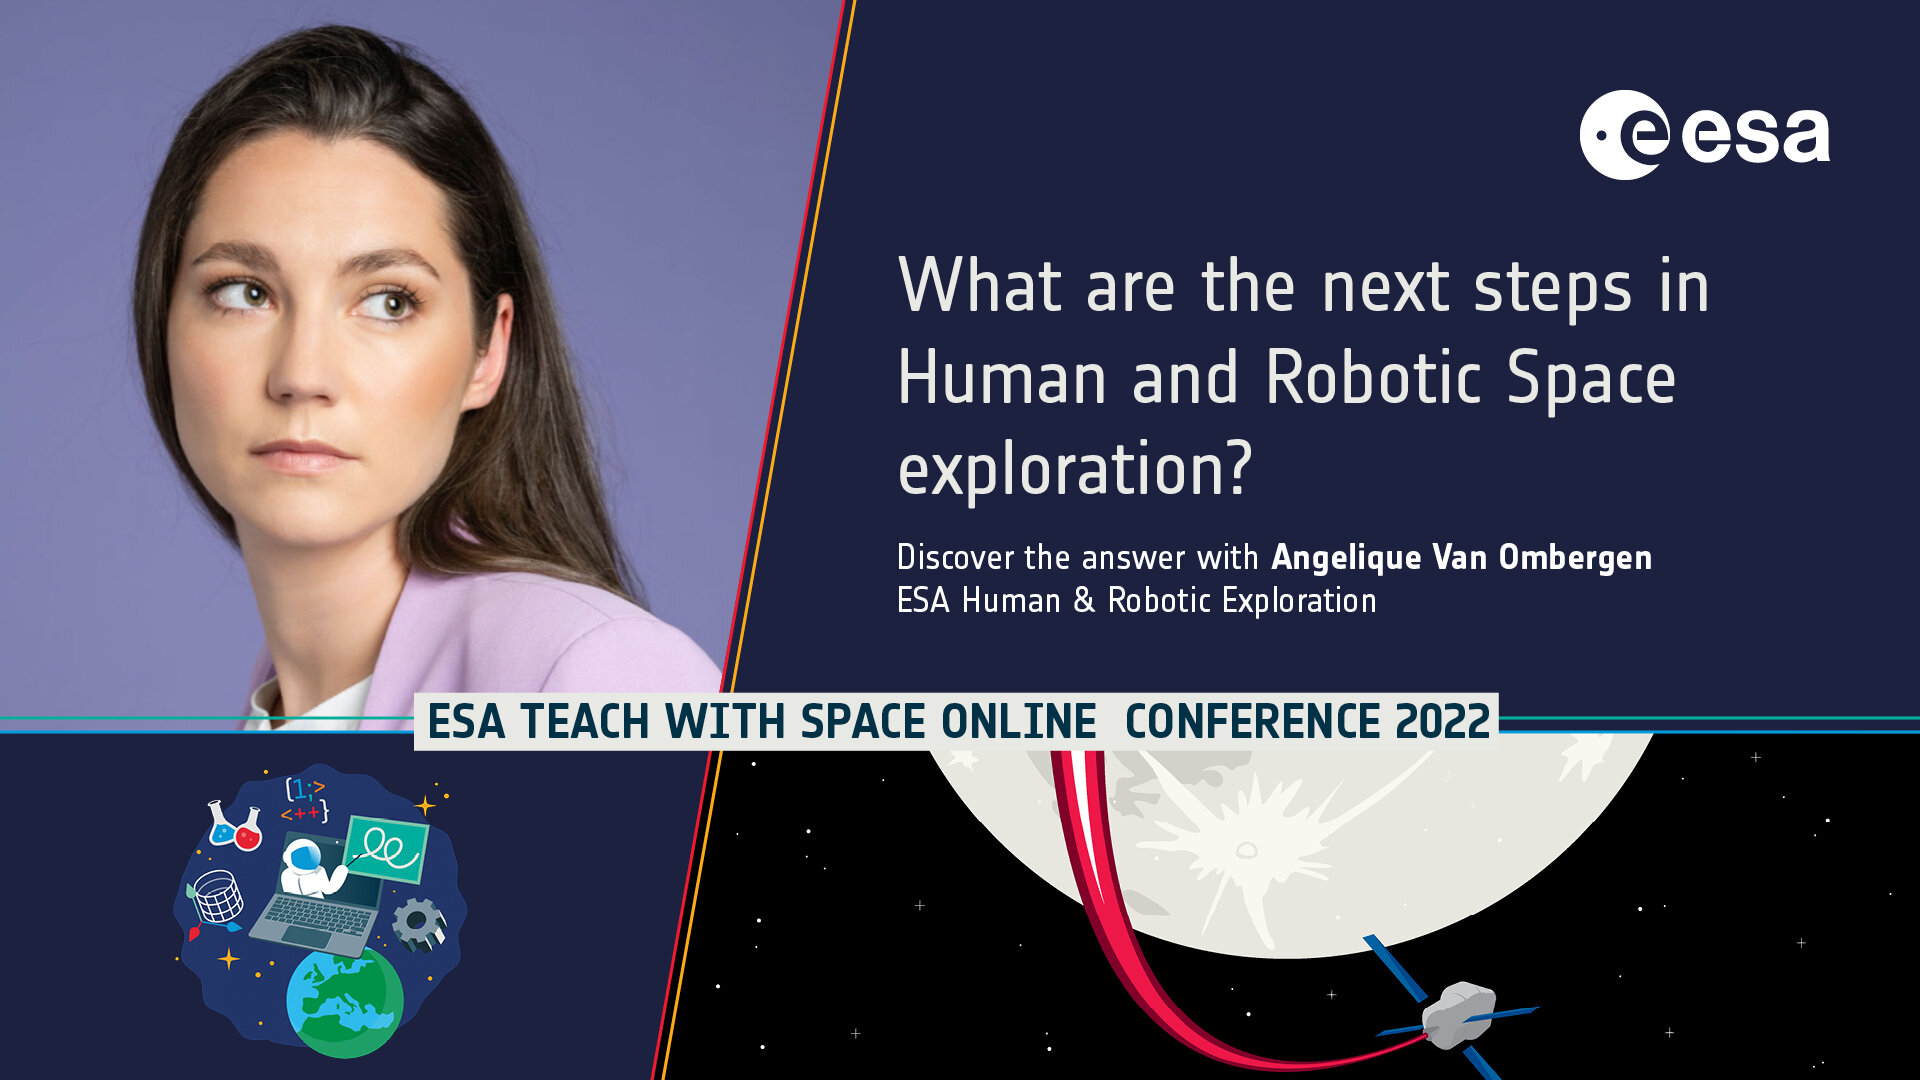 Angelique Van Ombergen is the key-note speaker for the "Once explorers, always explorers: Moon, Mars and beyond" plenary during ESA 's Teach with Space Online Conference 2022